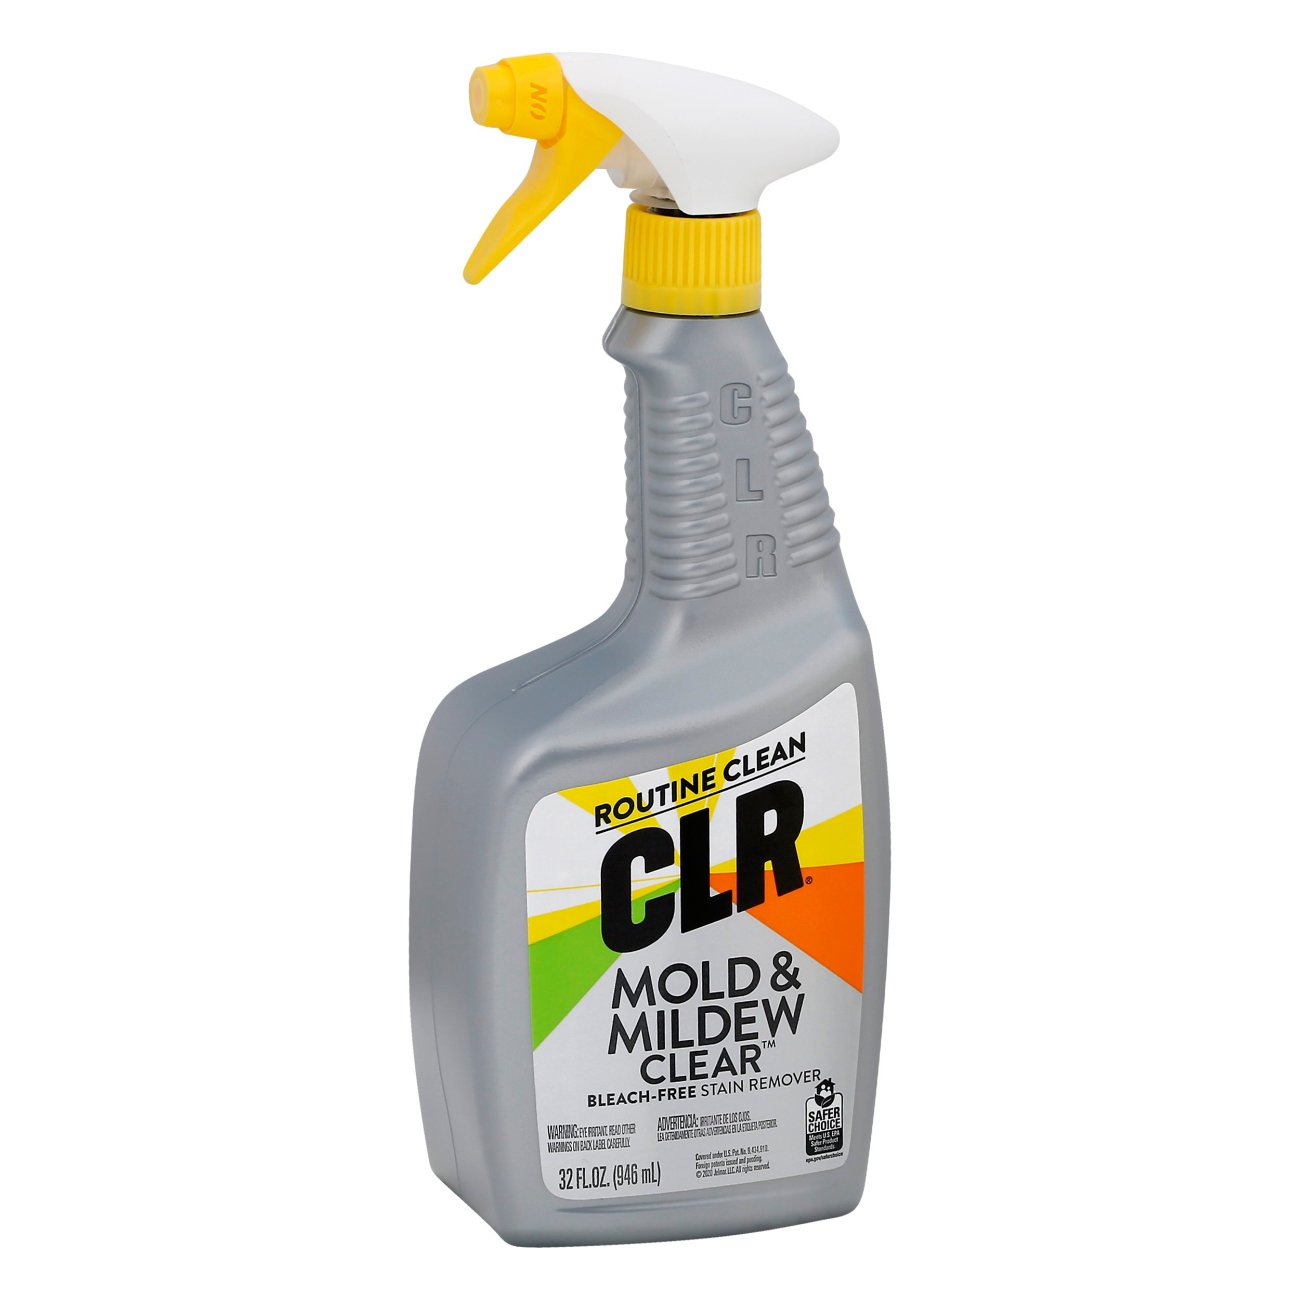 CLR Mold & Mildew Clear Bleach Free Stain Remover - 32 Fl. Oz. - Shaw's